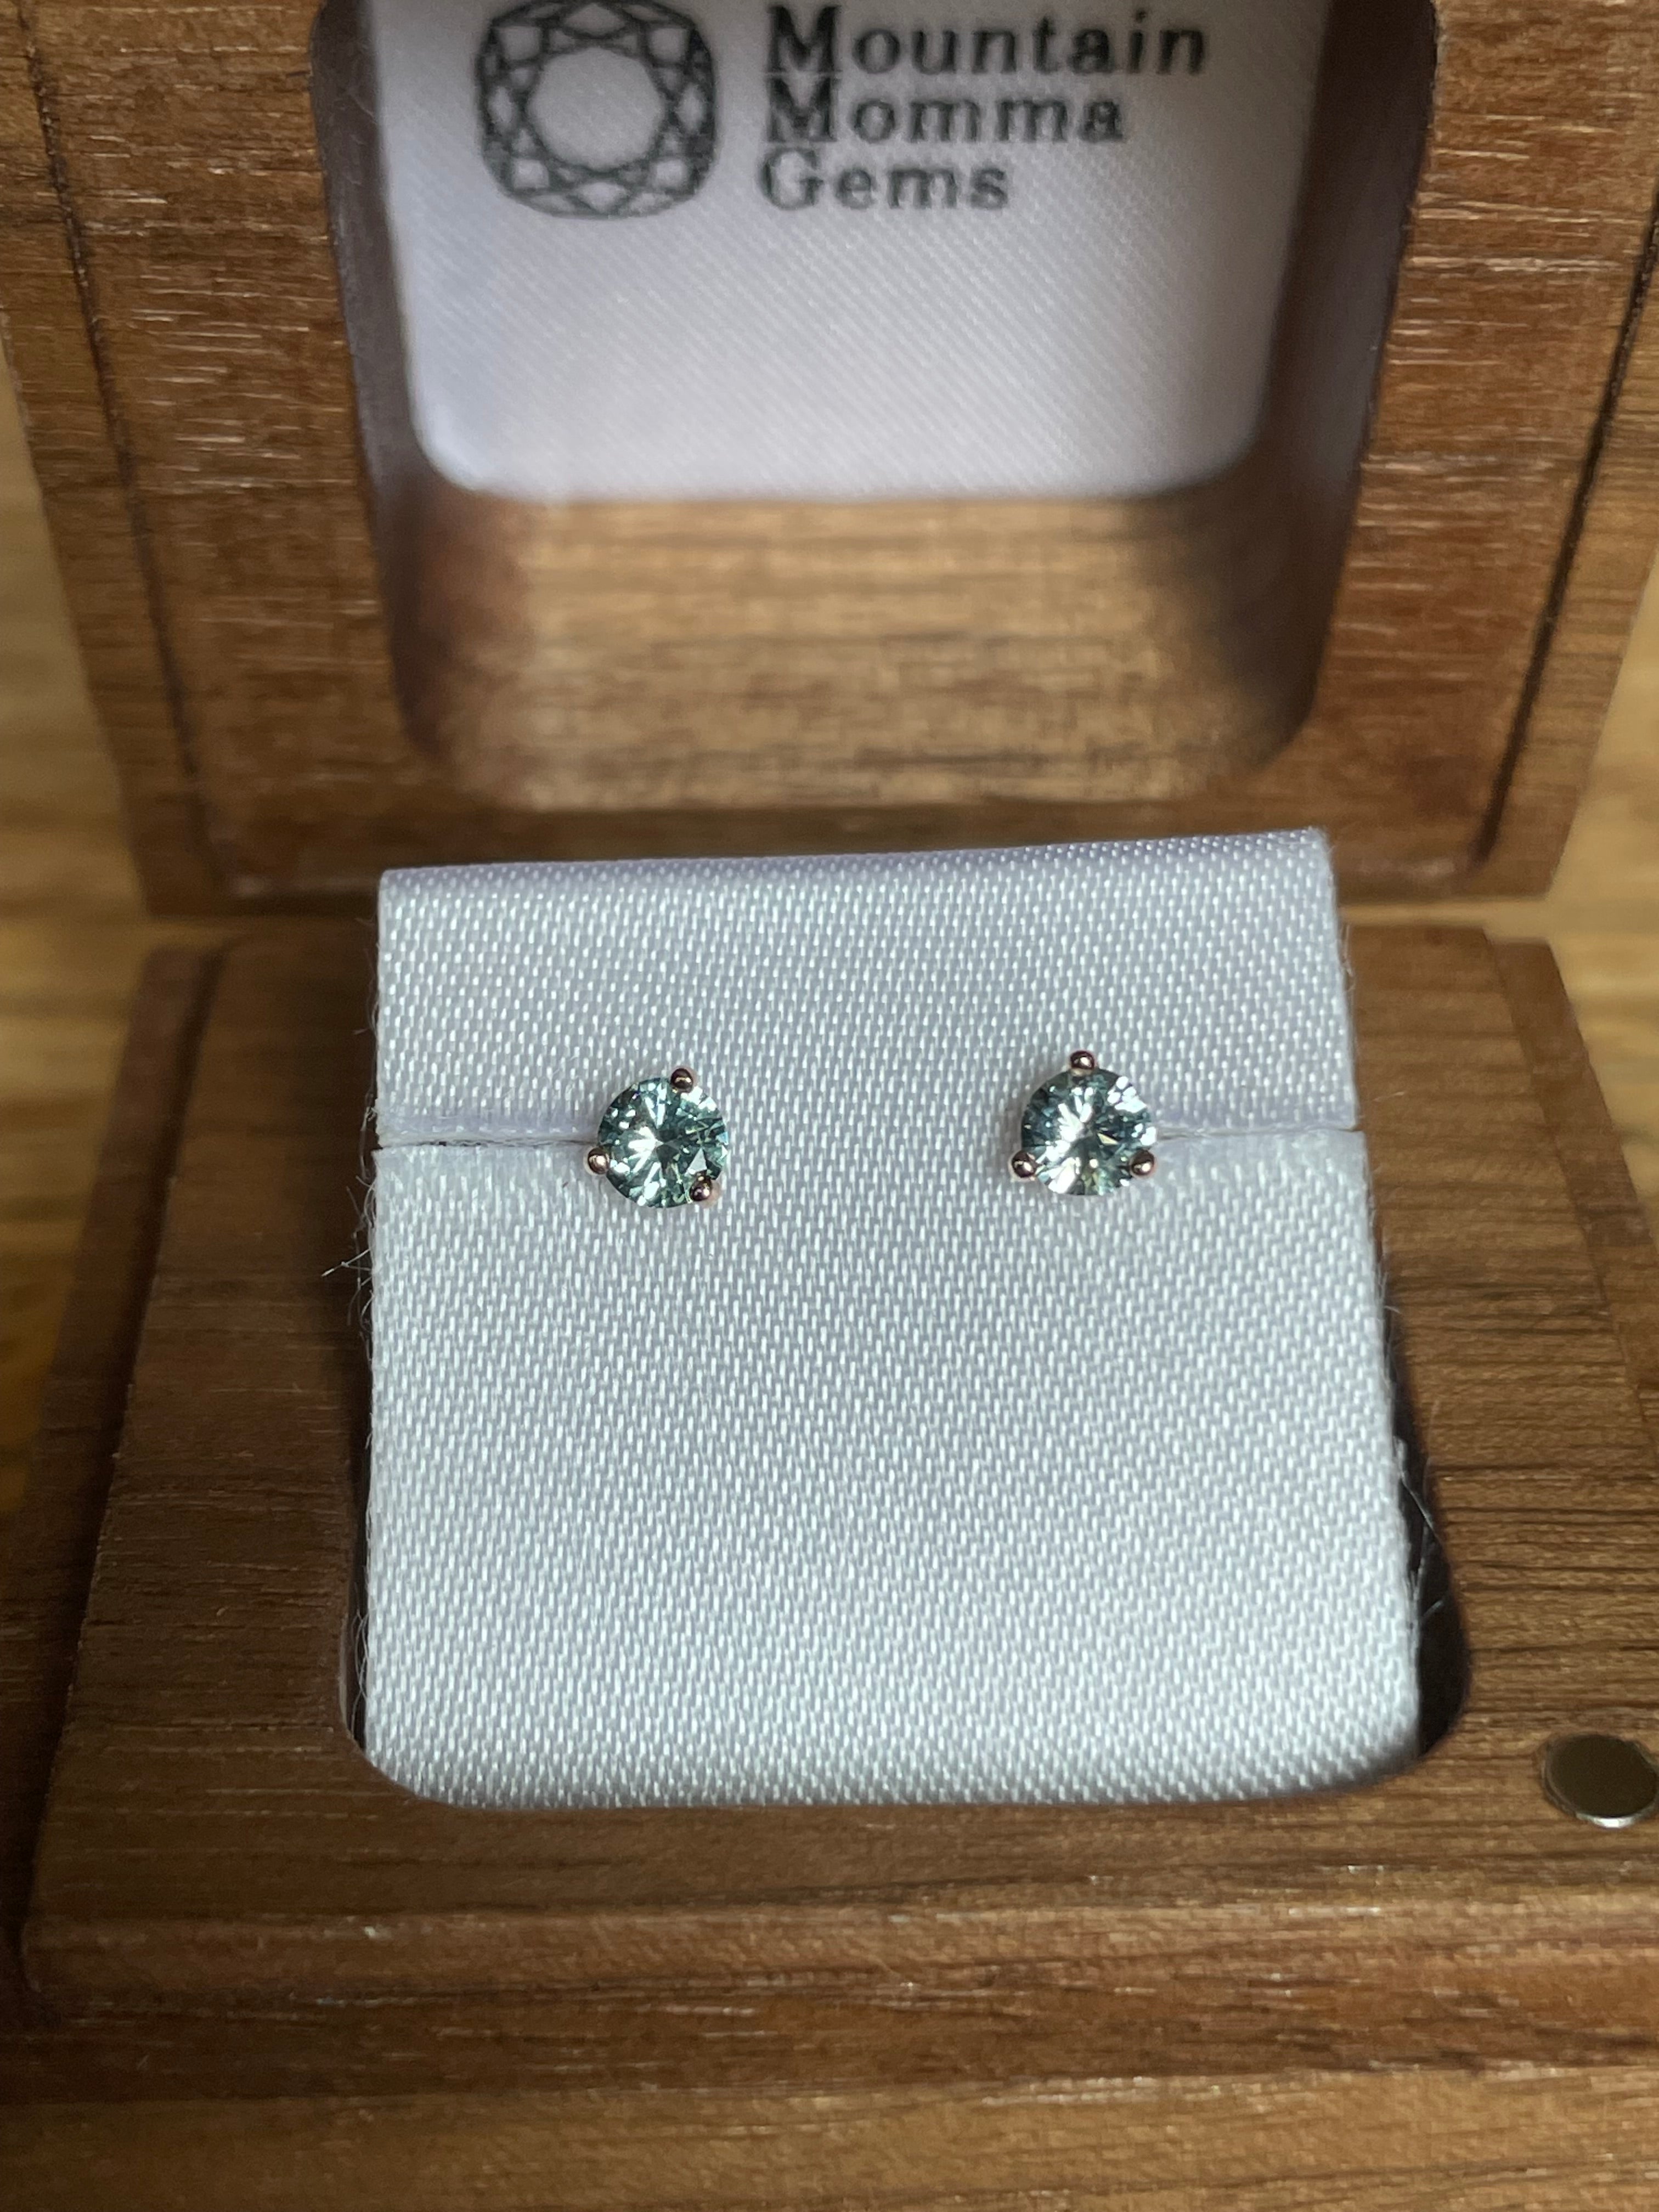 Montana Sapphire Stud Earrings - 3 prong Light Silvery Blue or Green Round .36 ctw in 14k Rose Gold